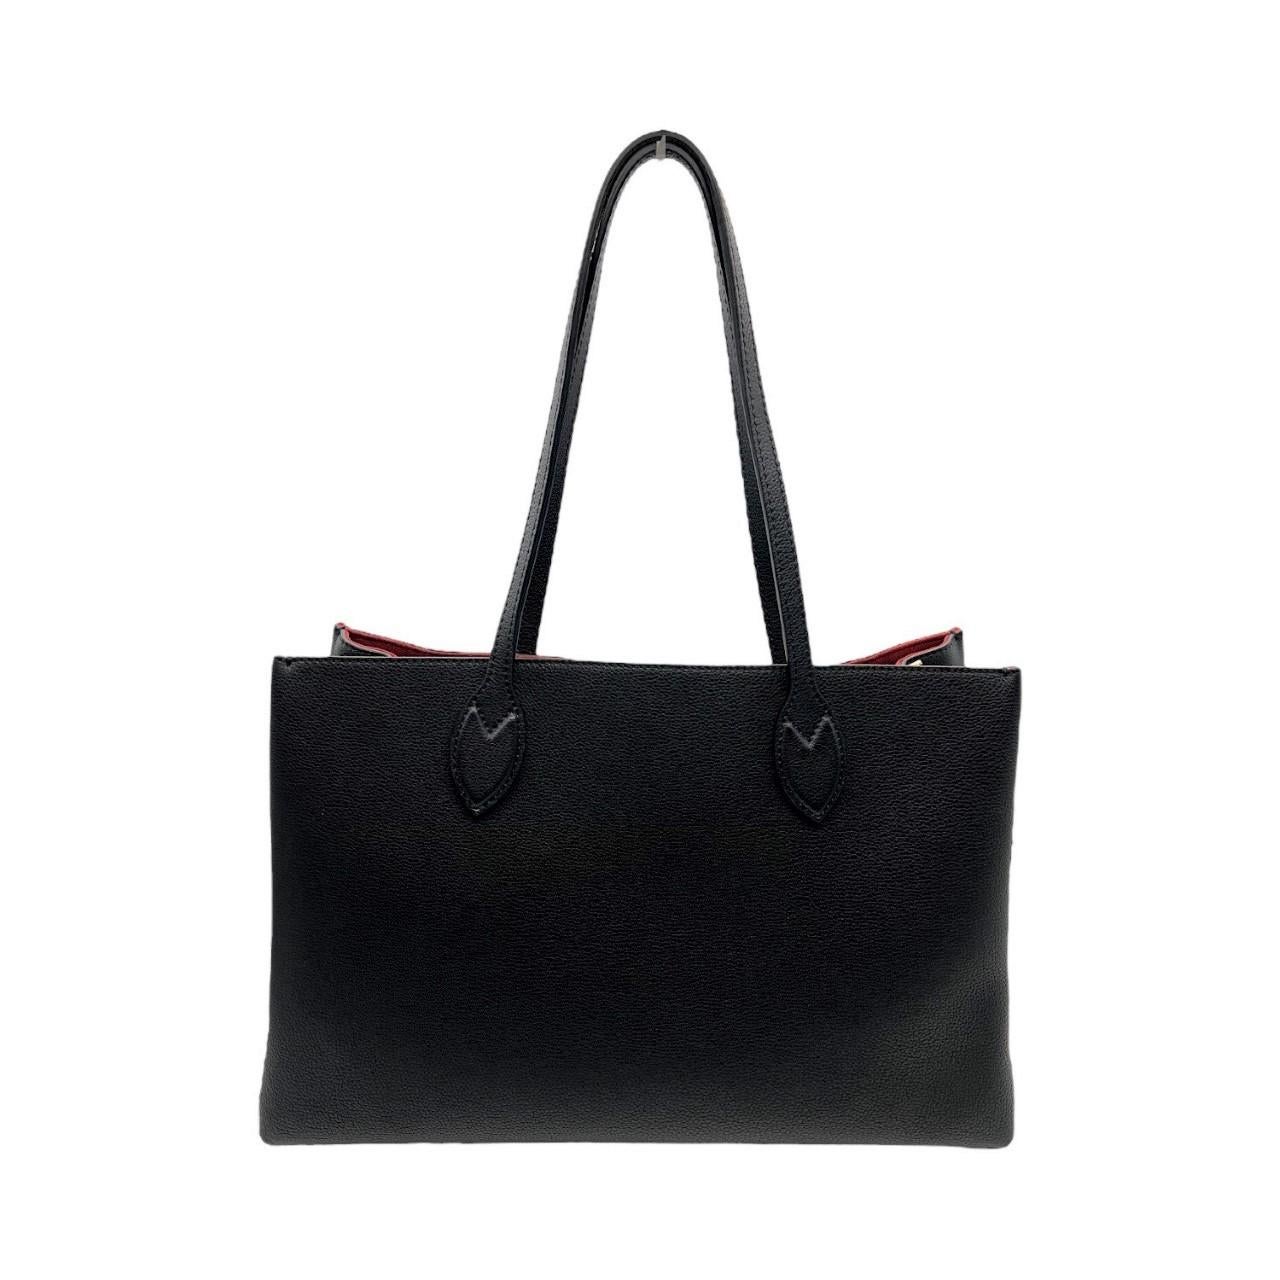 We are offering this very popular Louis Vuitton Lockme Shopper Tote. Made in France, it is finely crafted of grained calfskin leather in black. The bag features black leather strap handles with a polished gold-tone Louis Vuitton turn lock. This